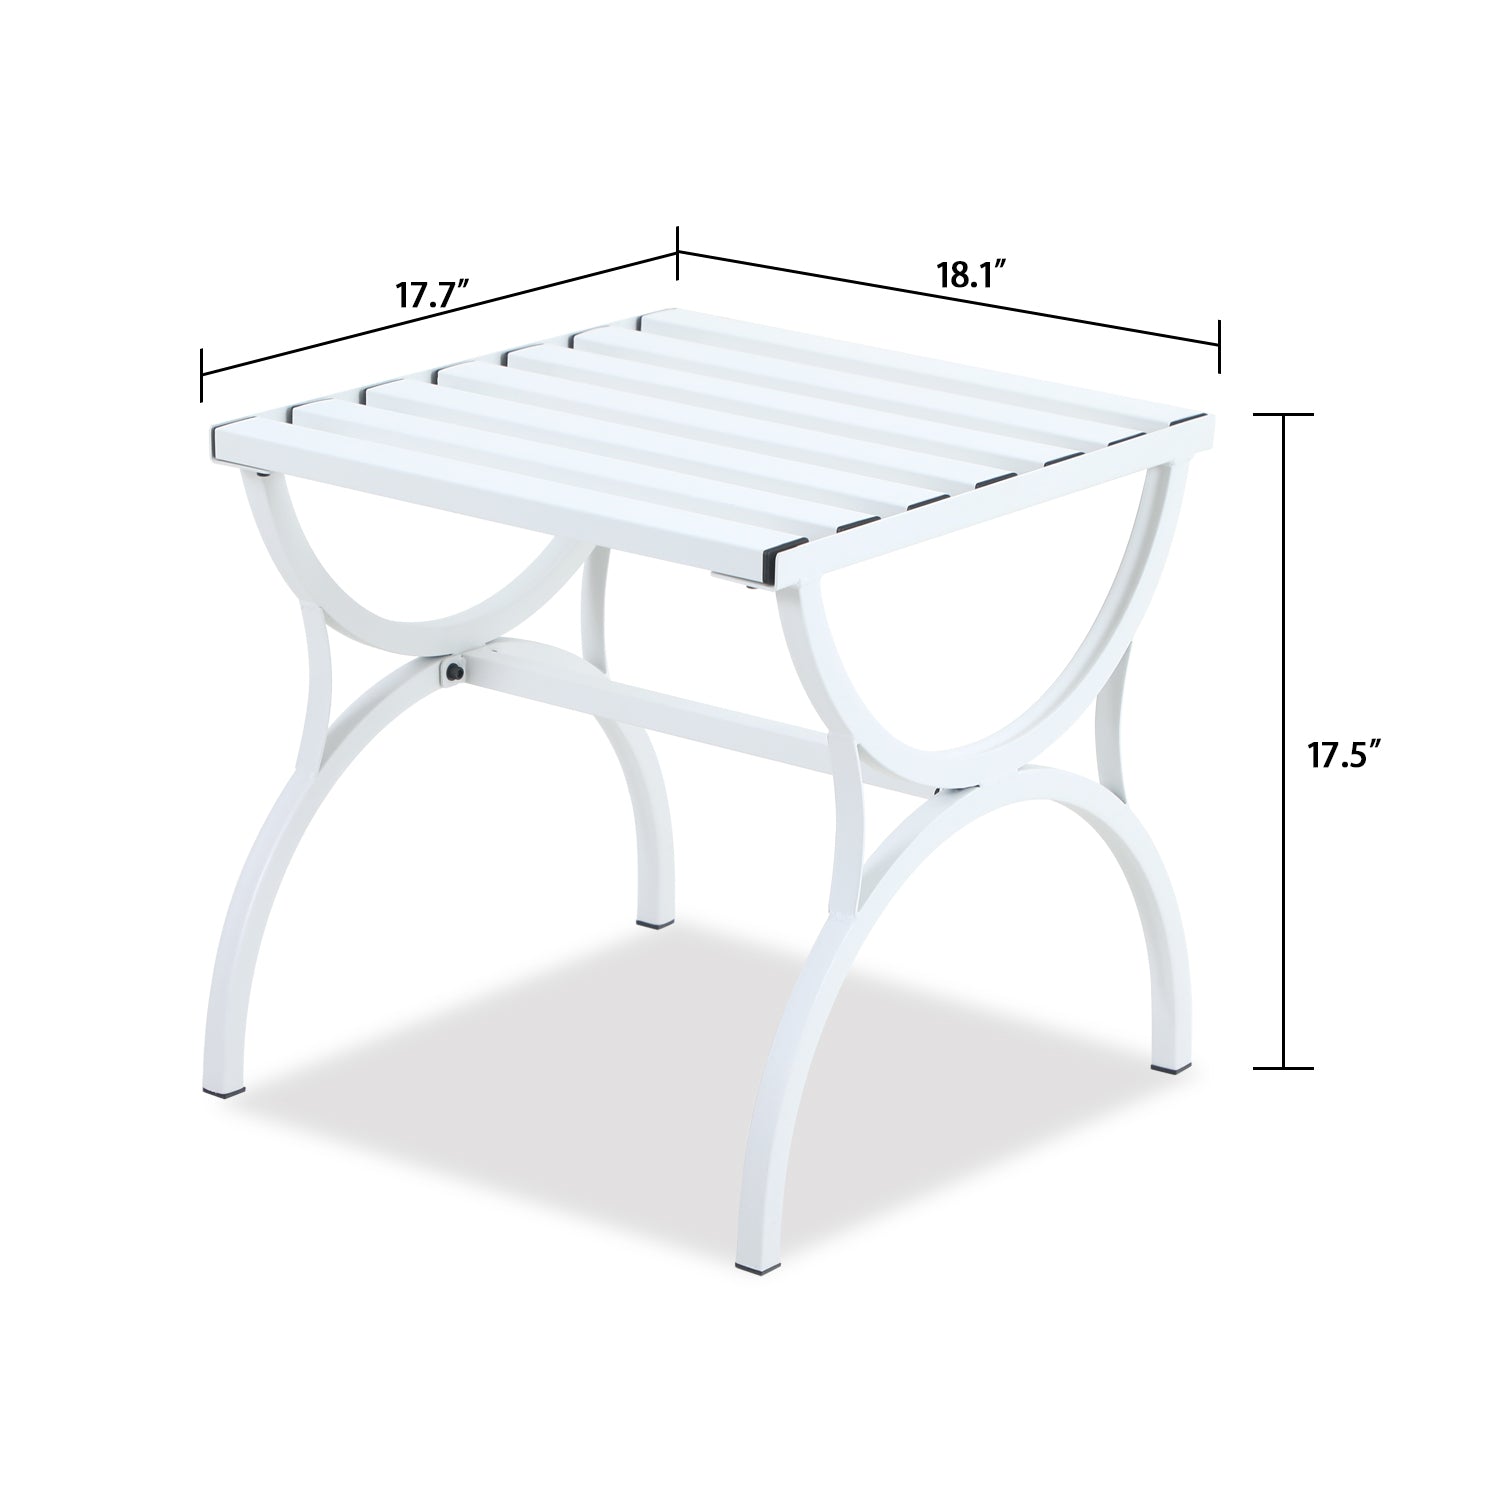 Sophia & William Metal Outdoor Side Table Slatted Top Design - White - image 2 of 4